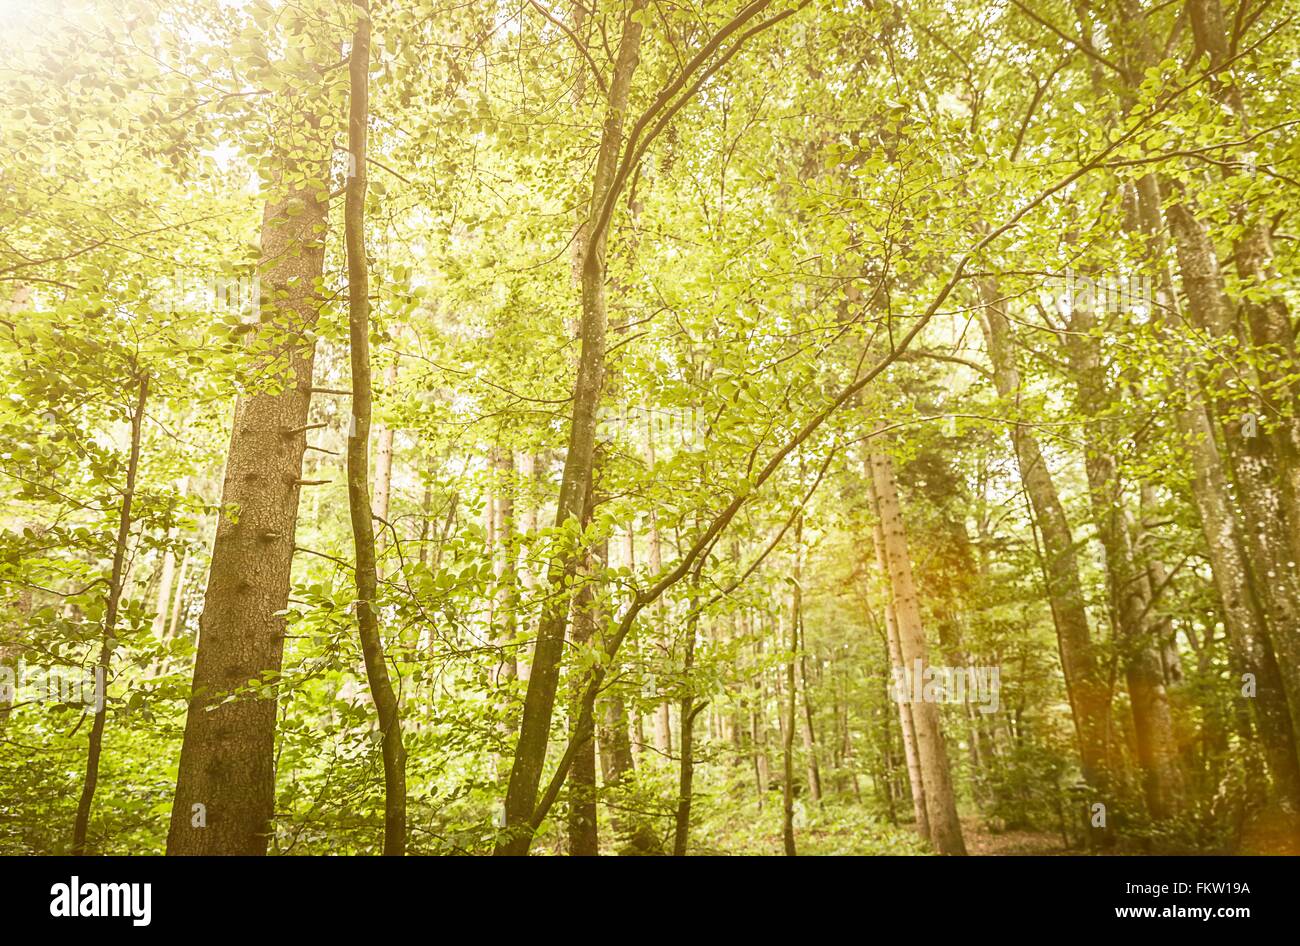 Sunlit forest scene with green foliage Stock Photo